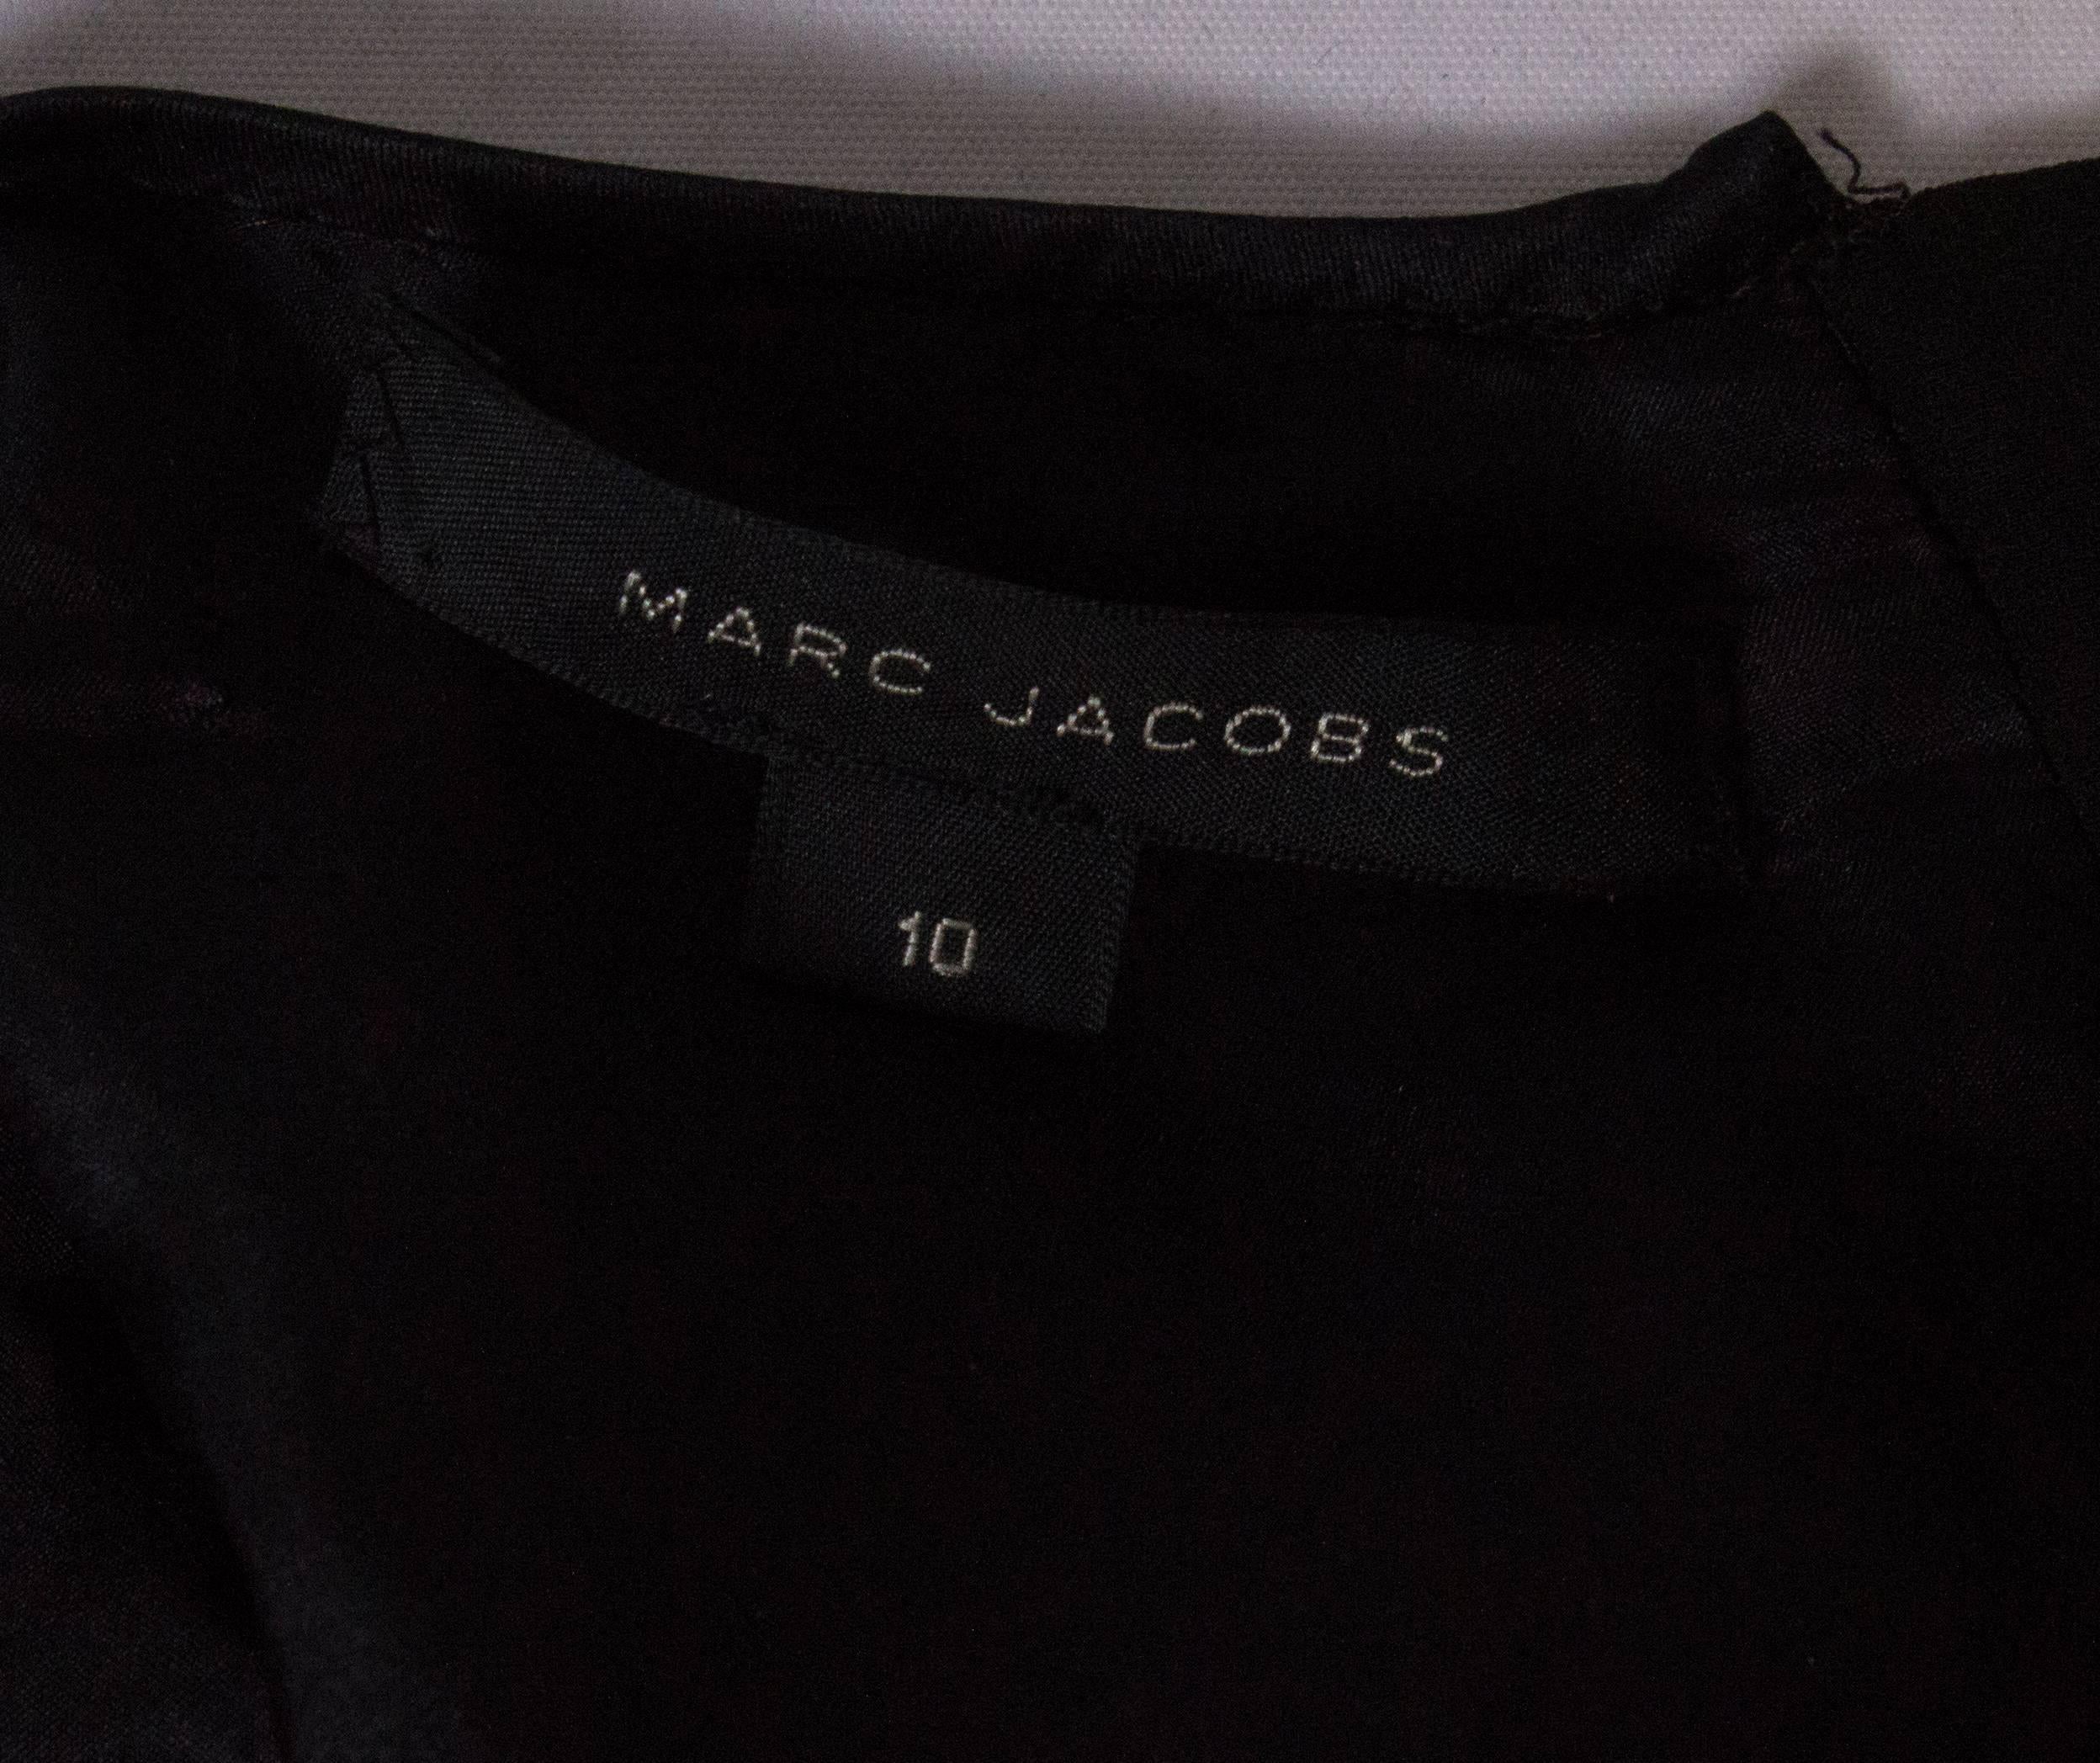 Stunning Marc Jacobs Evening Top For Sale 3